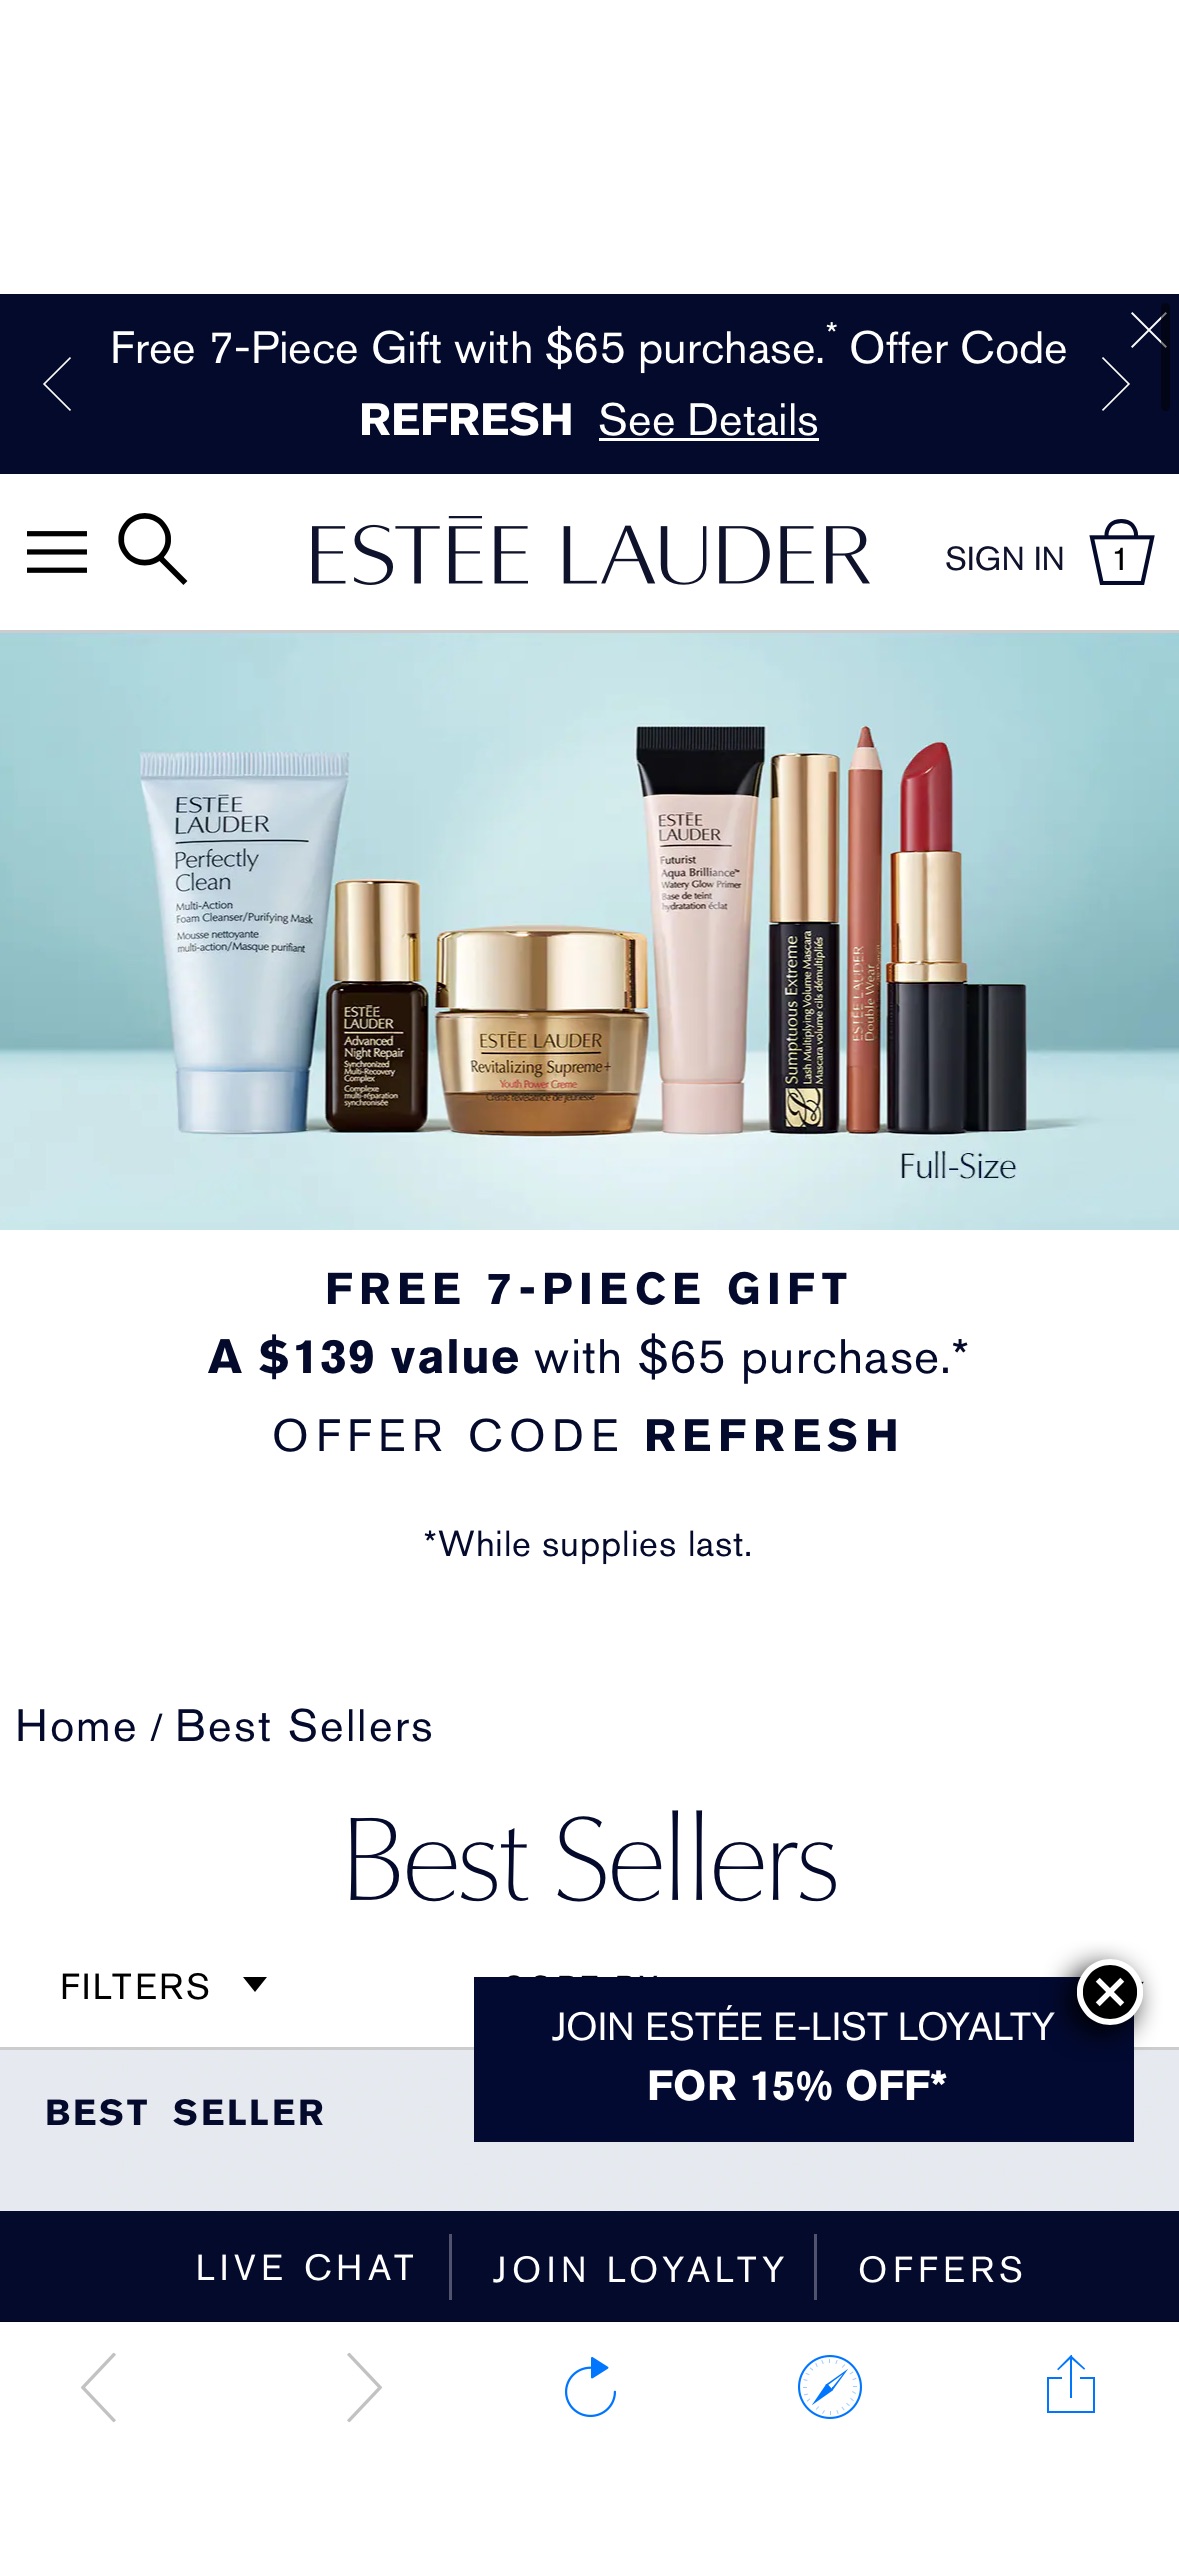 FREE 7-PIECE GIFT
A $139 value with $65 purchase.*
OFFER CODE REFRESH